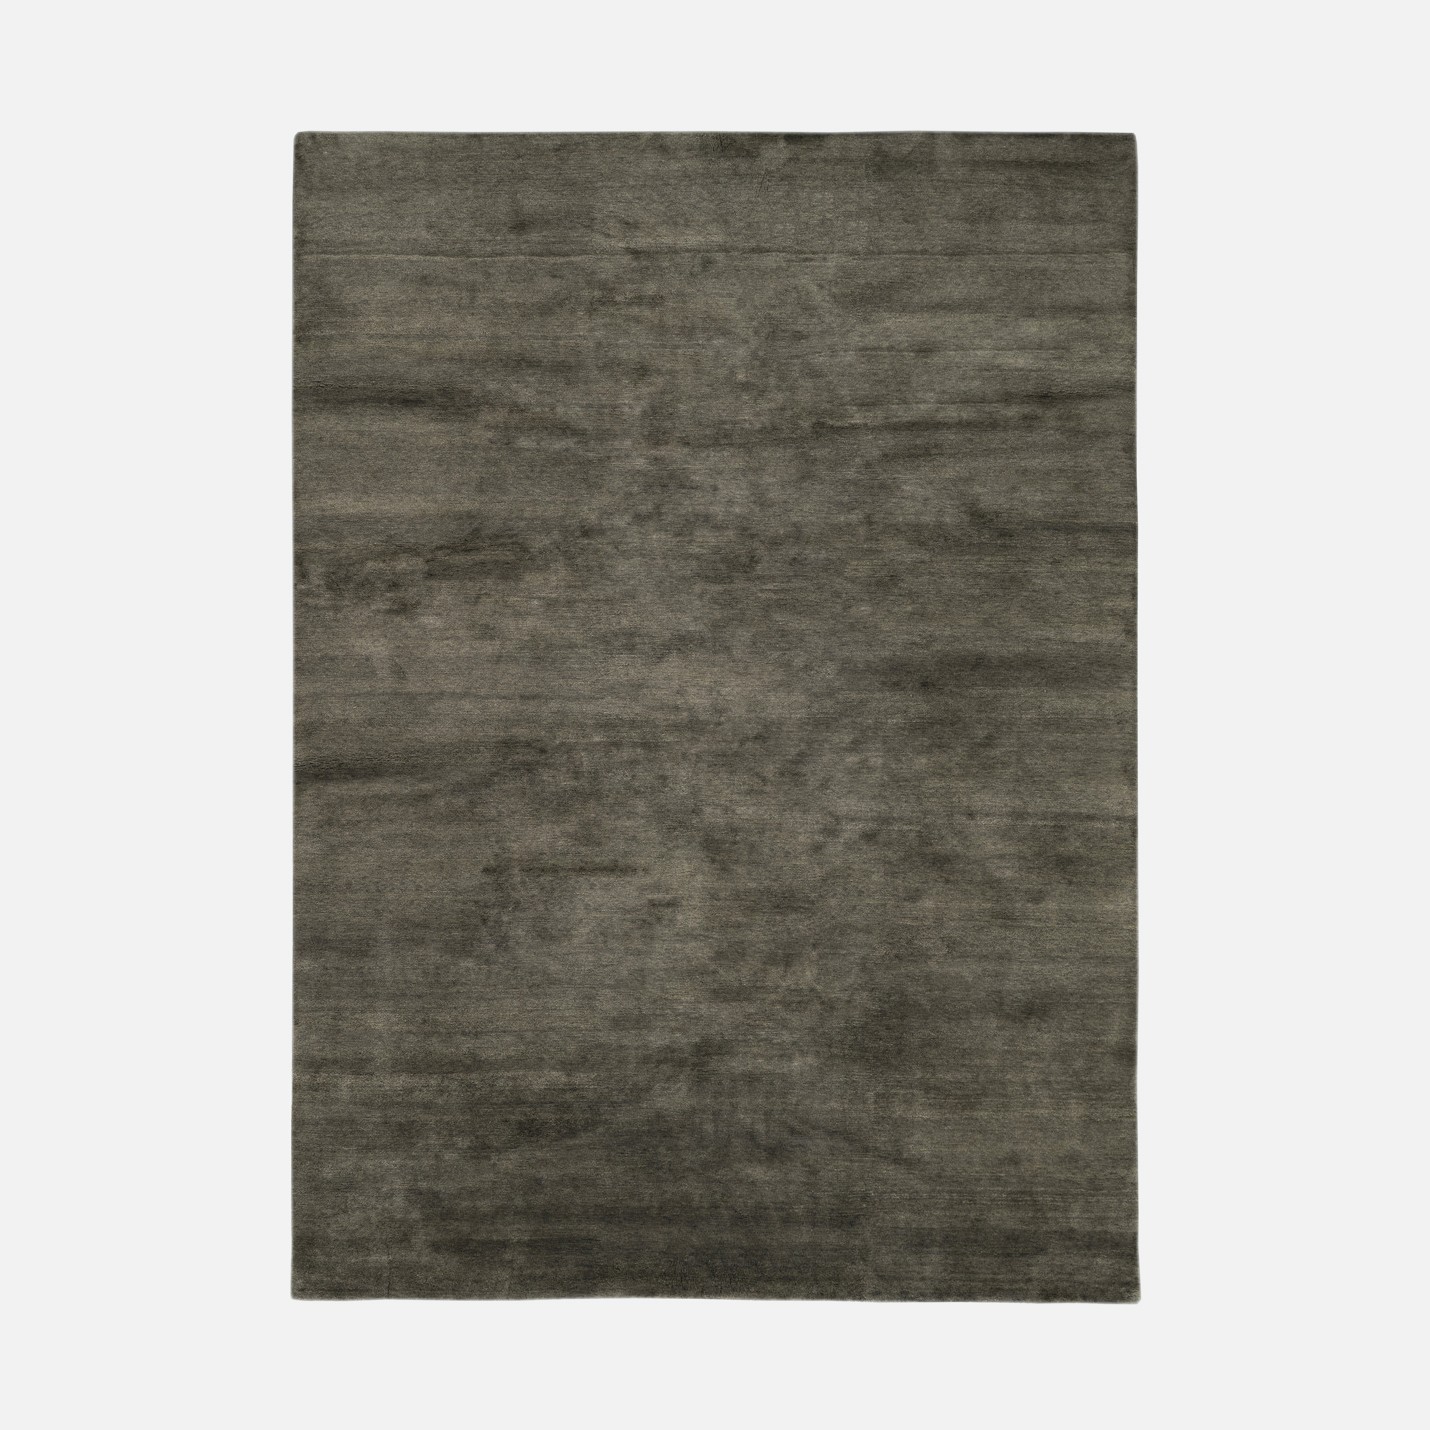 a gray rug with a white border